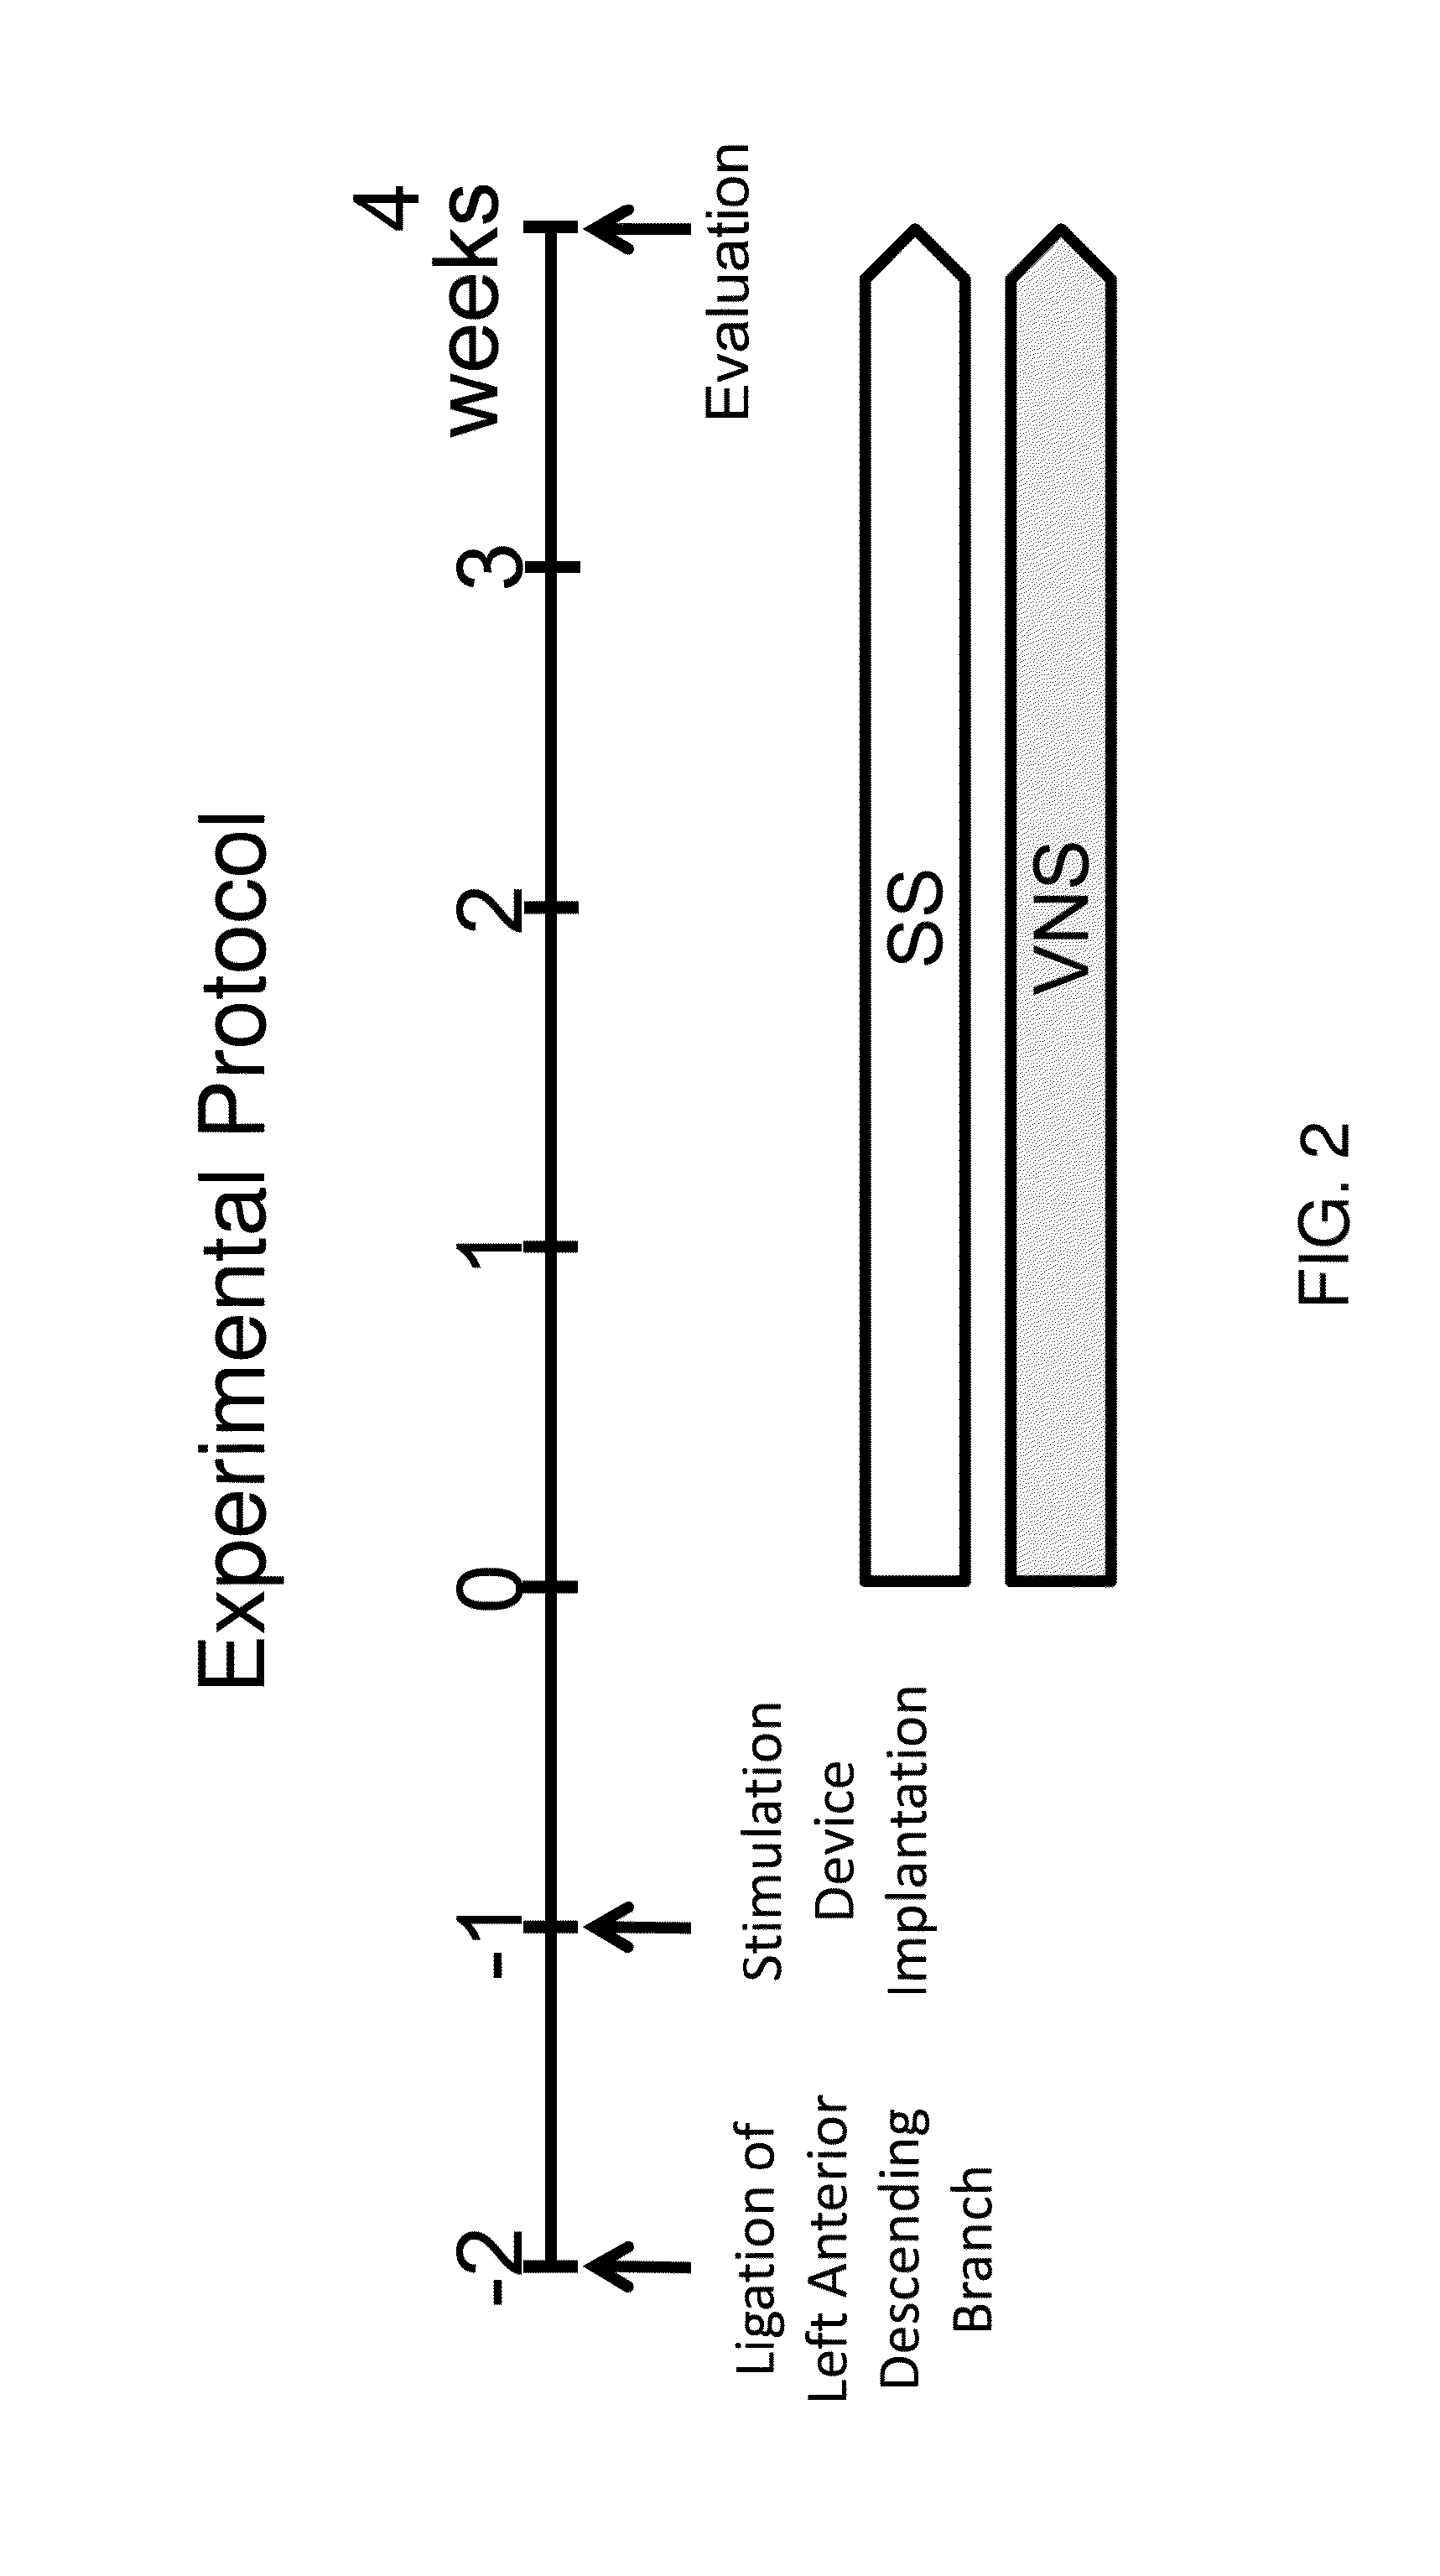 Electric or magnetic stimulation device for treatment of circulatory disease